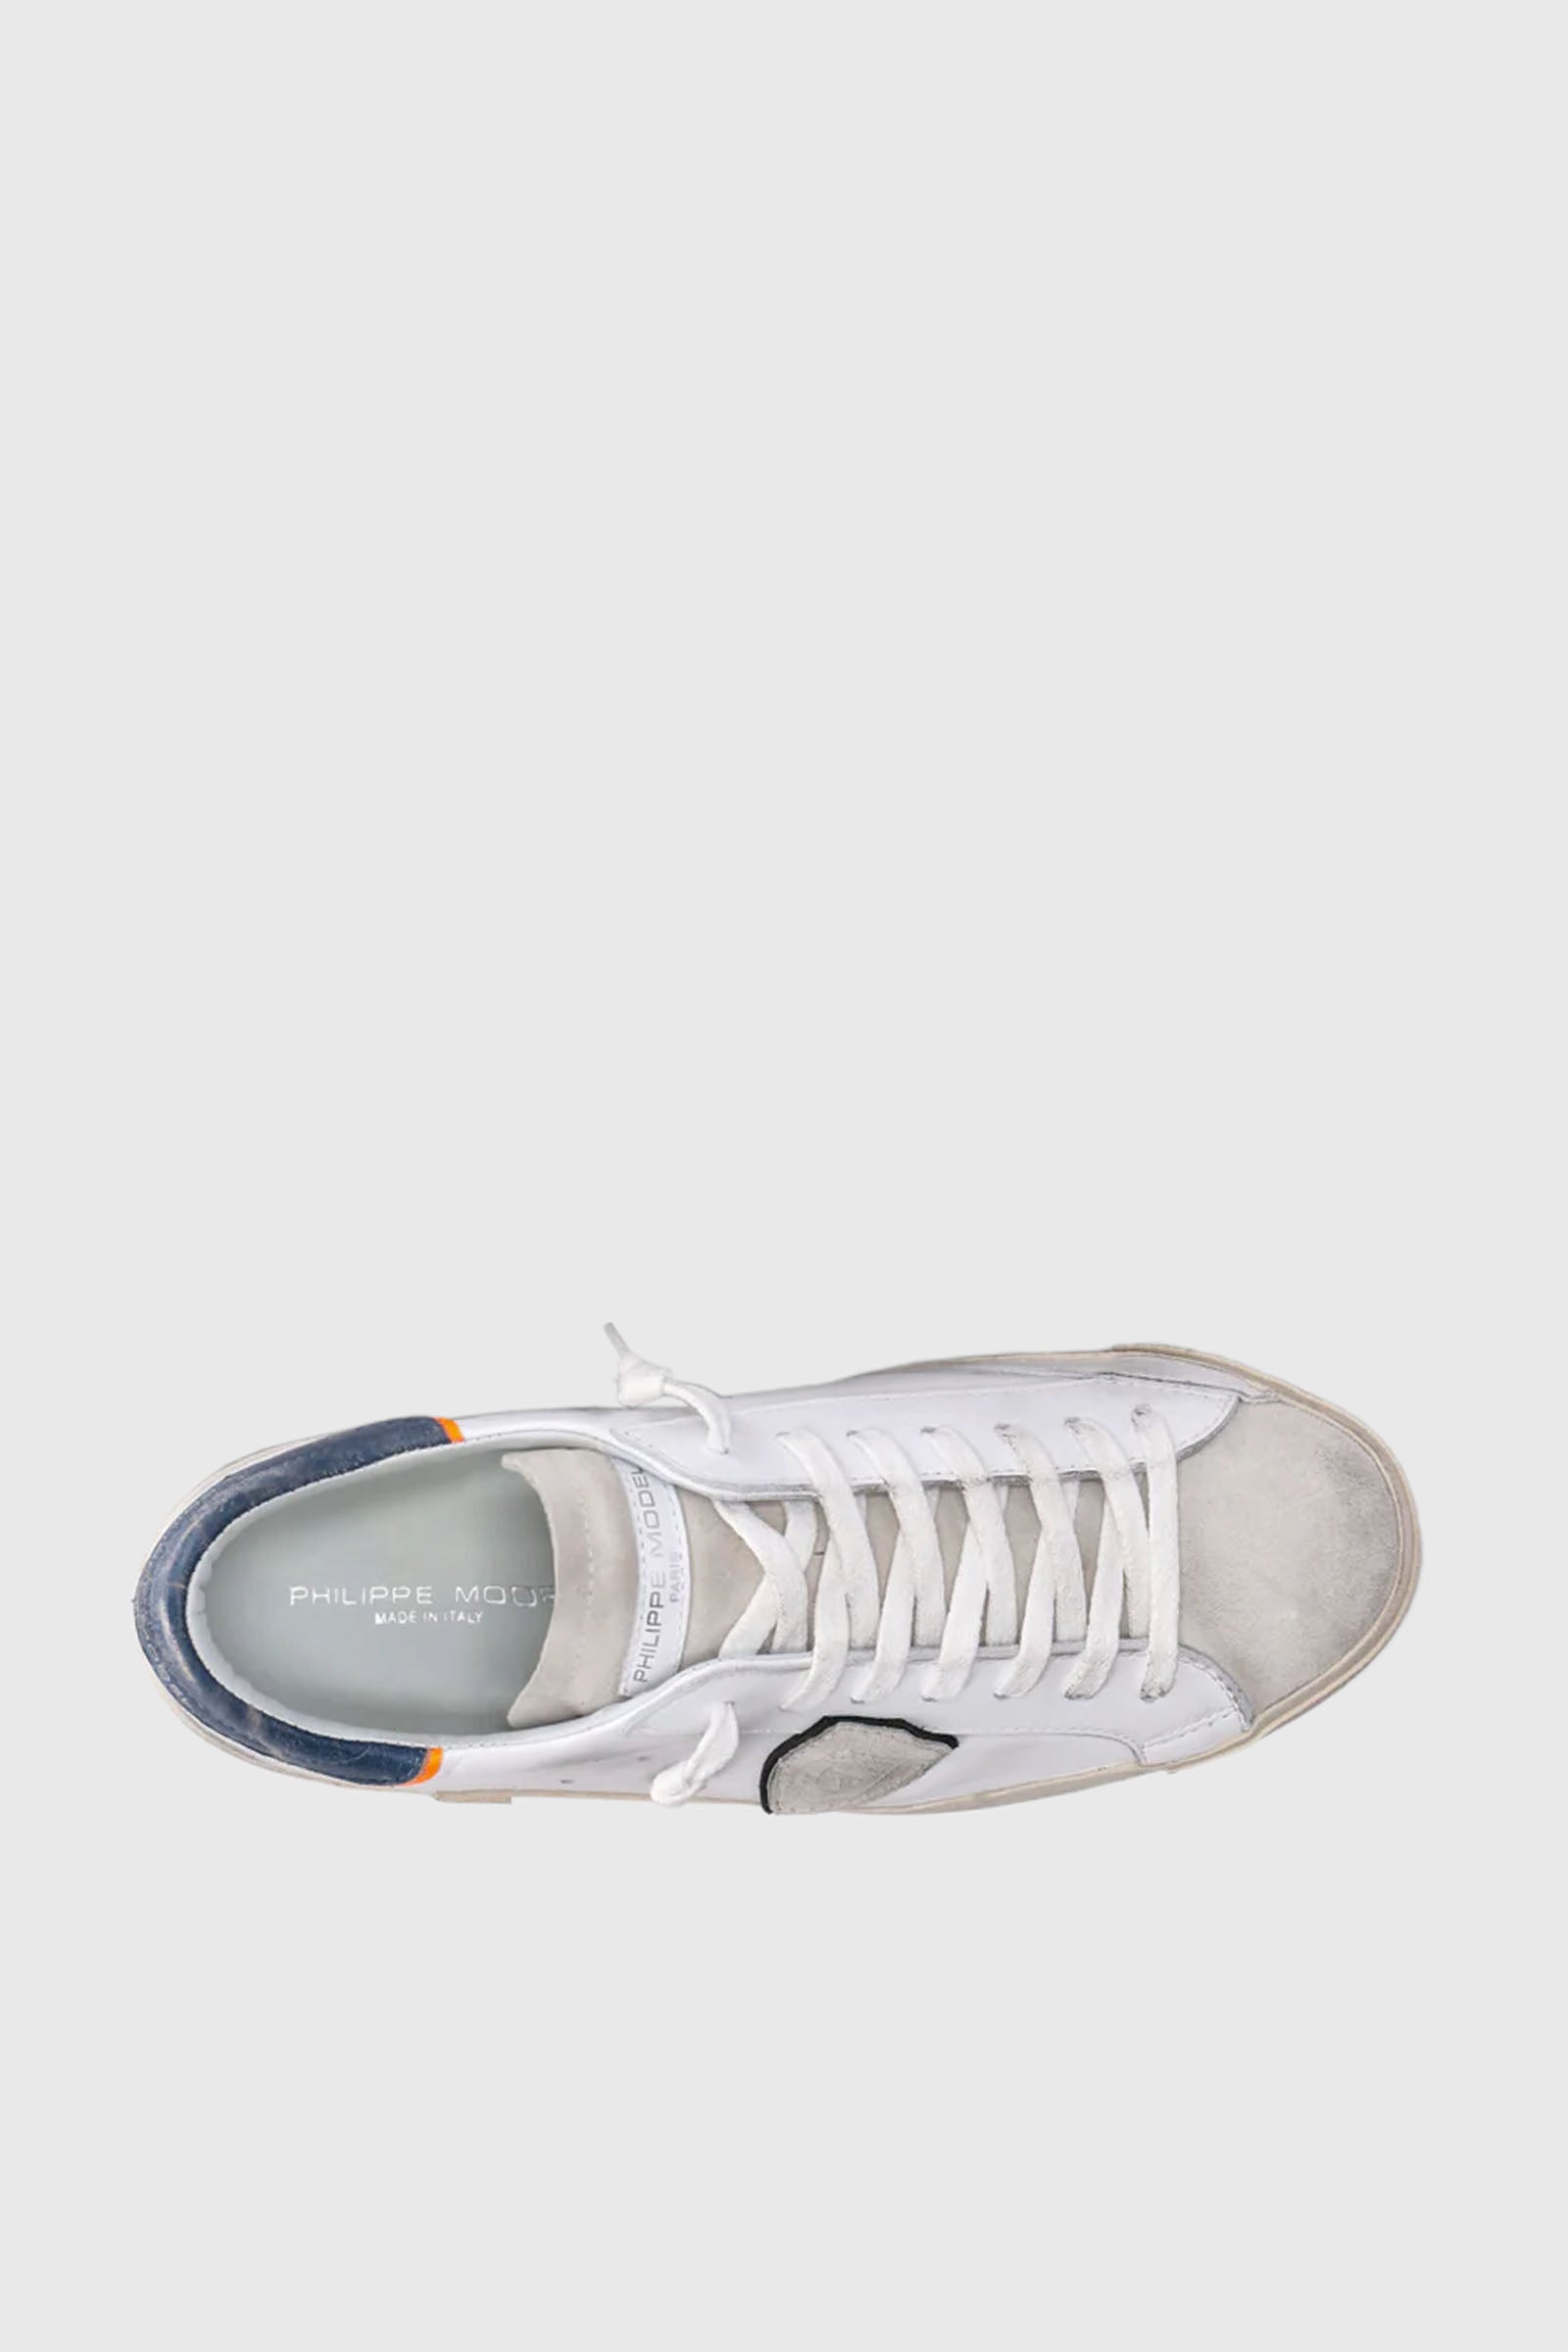 Philippe Model PRSX Vintage Veal Leather Sneakers White/Blue - 5